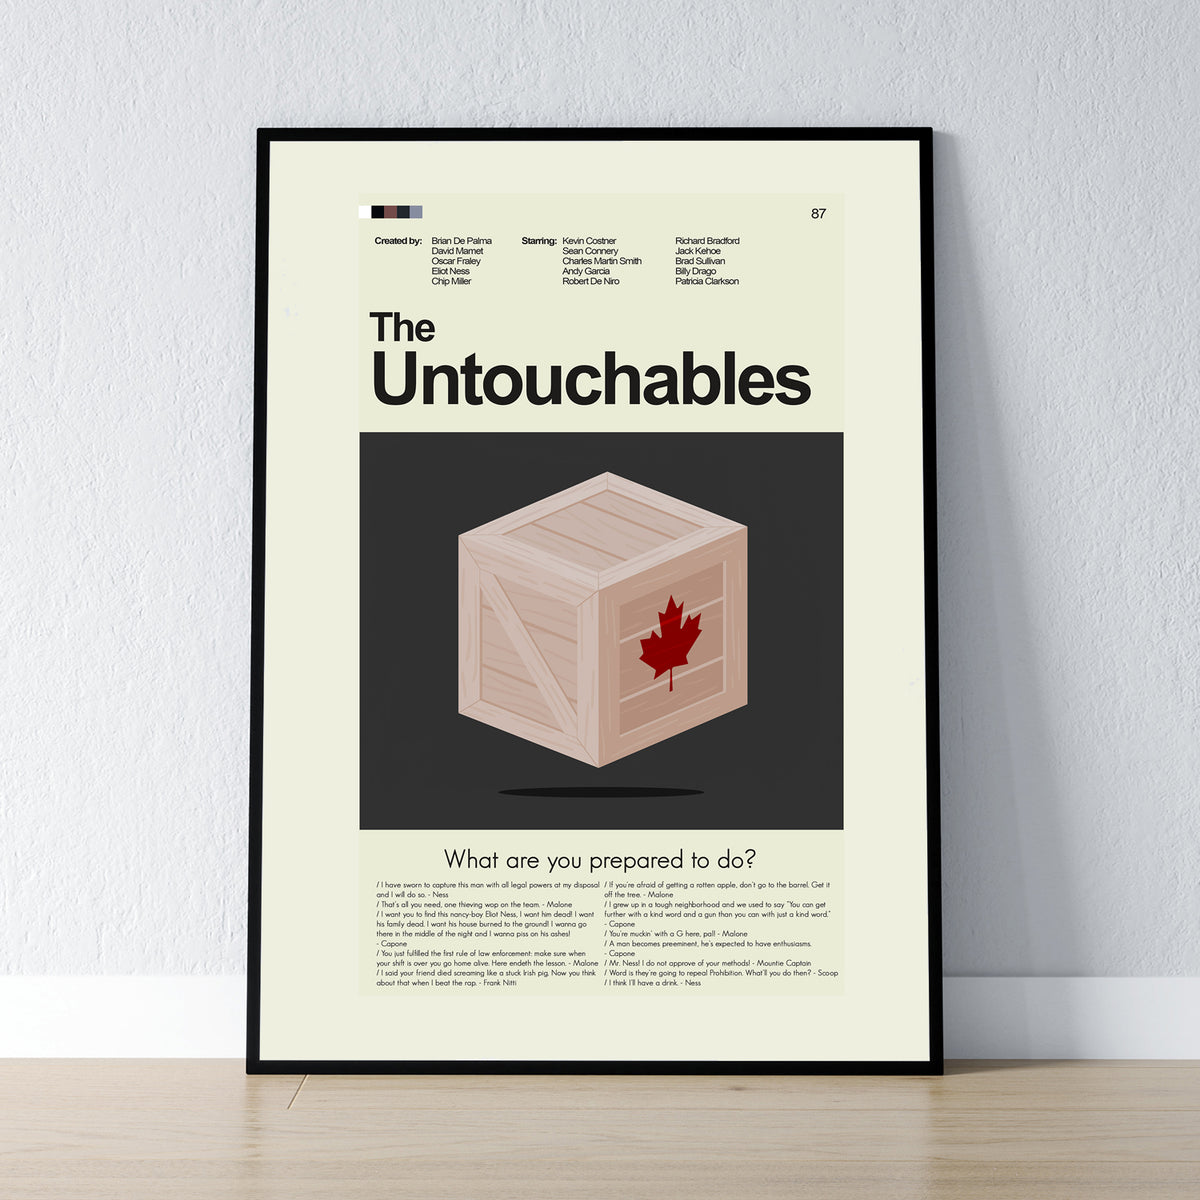 The Untouchables - Crate | 12"x18" or 18"x24" Print only